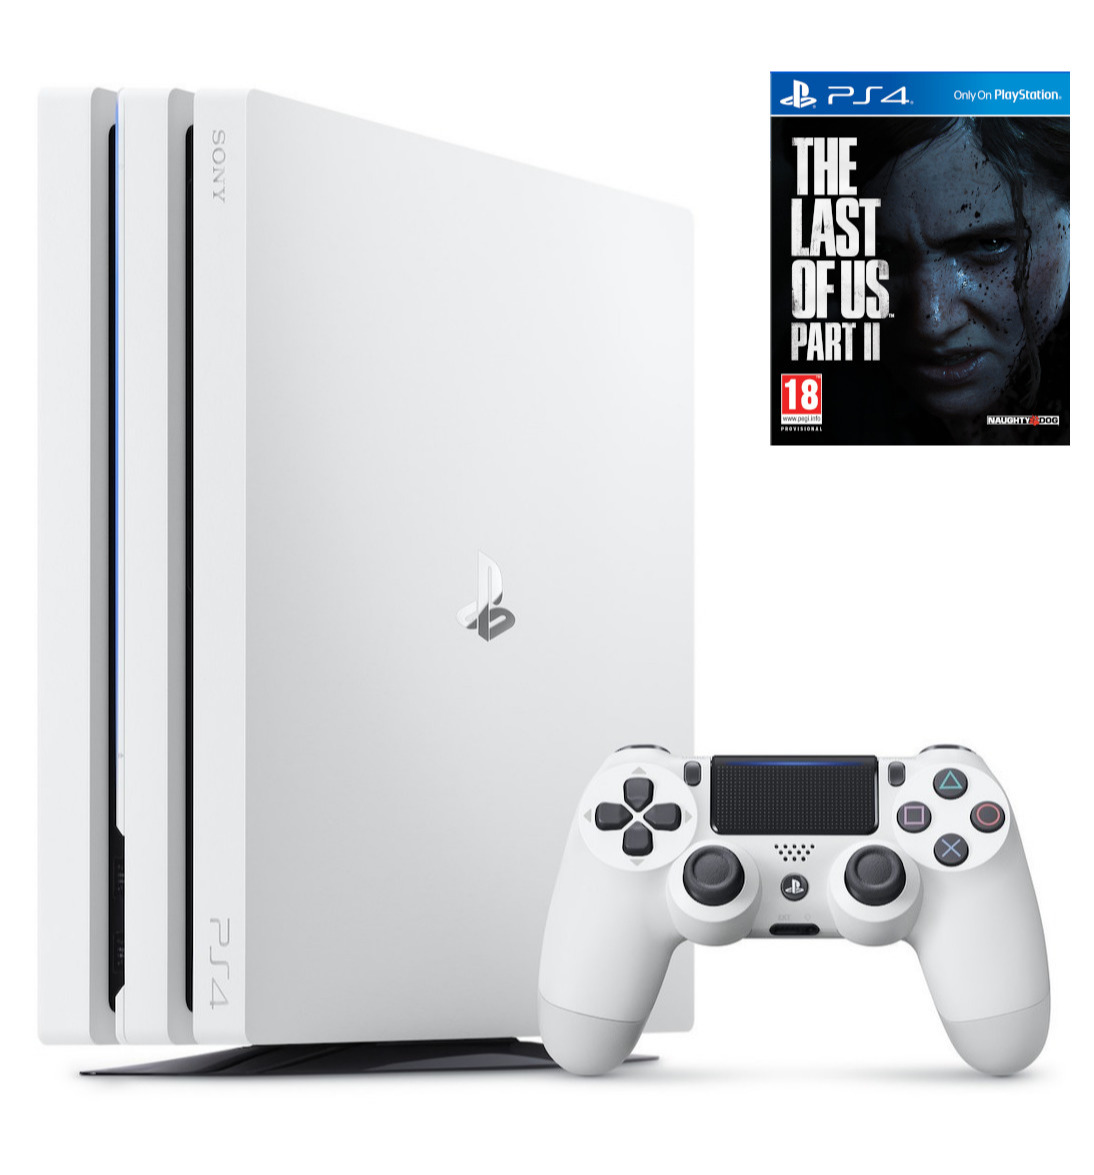 Konzole PlayStation 4 Pro 1TB - Glacier White + The Last of Us Part II (PS4)